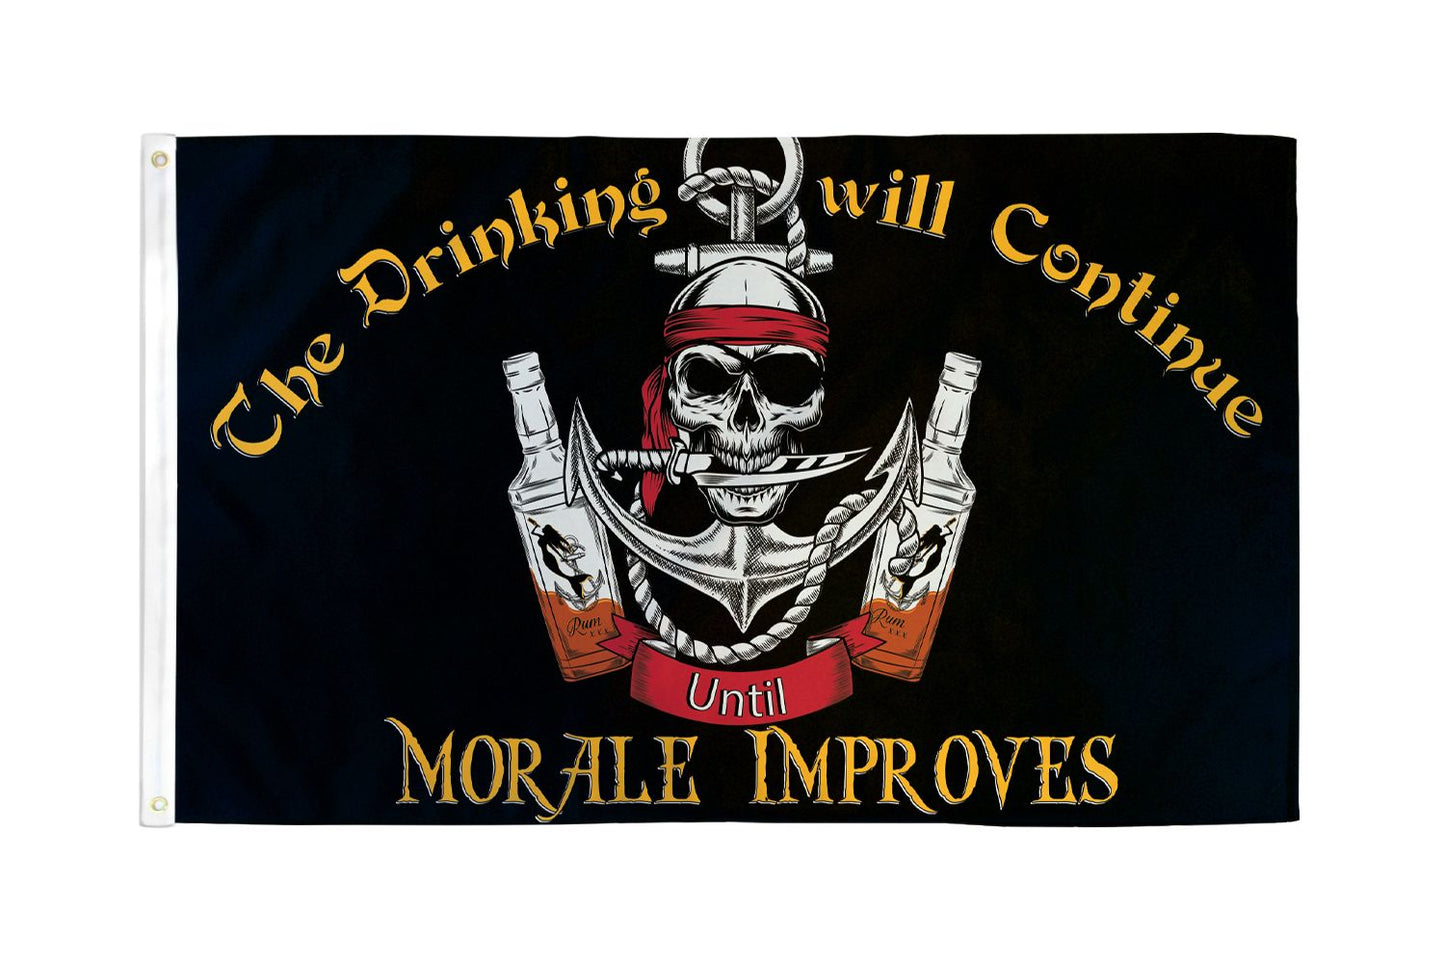 The drinking will continue until morale improves pirate flag 5ft x 3ft